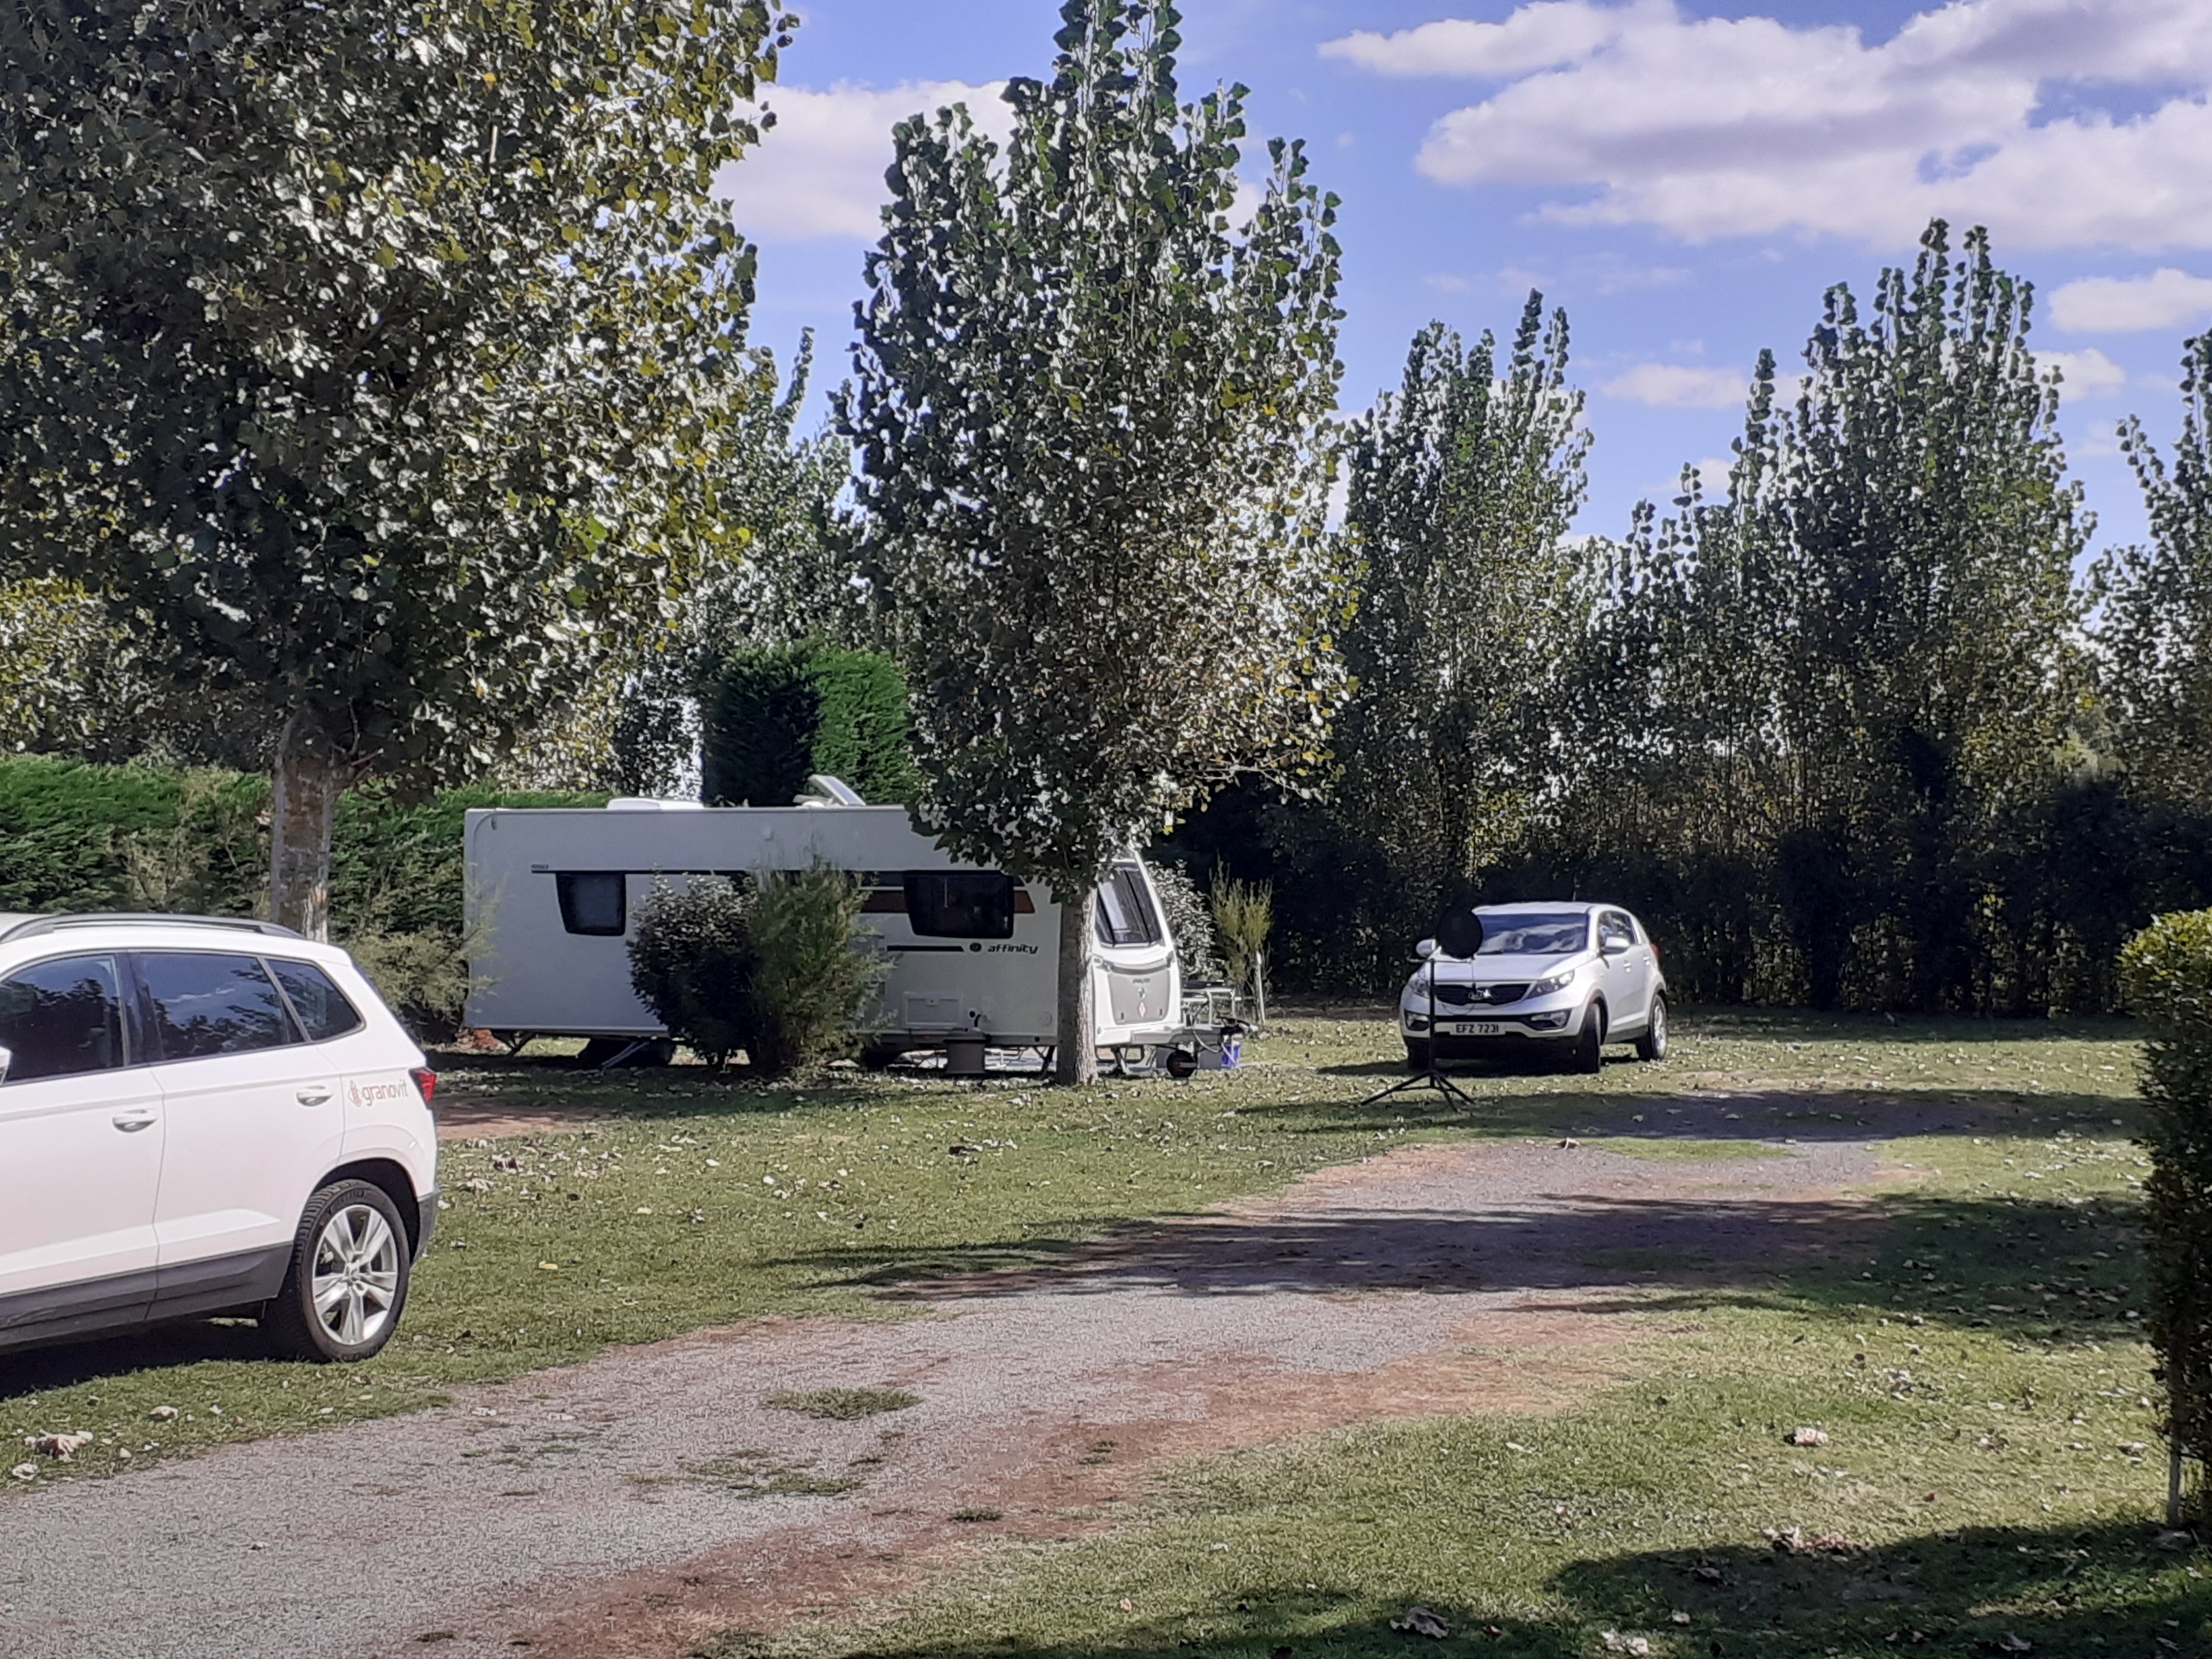 Pitch caravan - 7.50 m  (water, electricity, drain, 2 people and 1 vehicle) 1/2 Ppl.